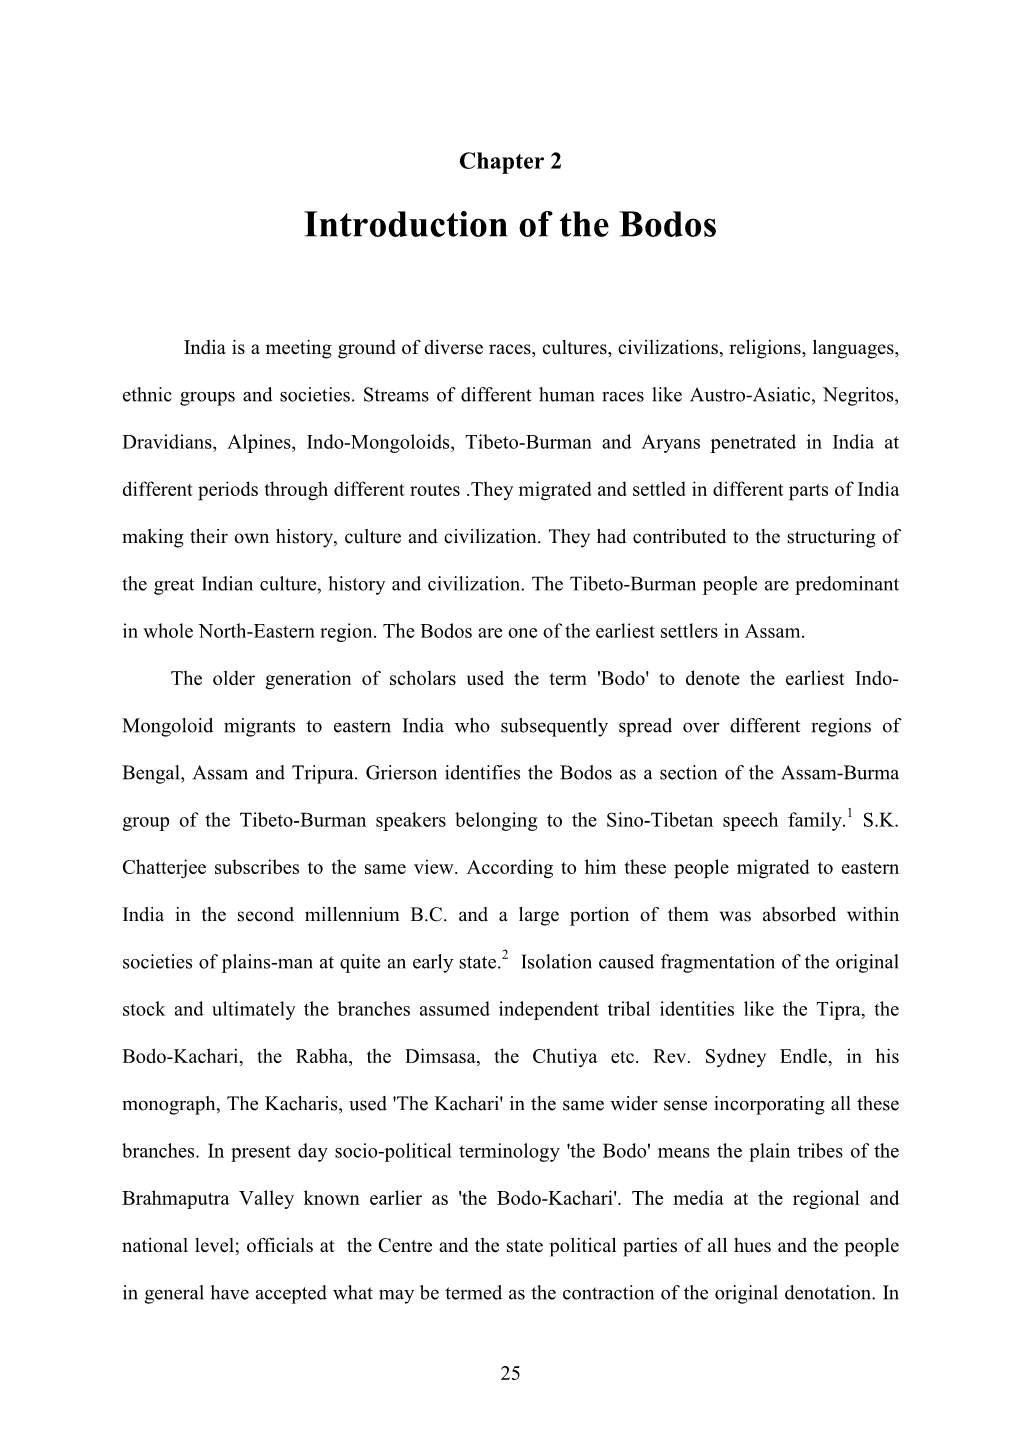 Introduction of the Bodos